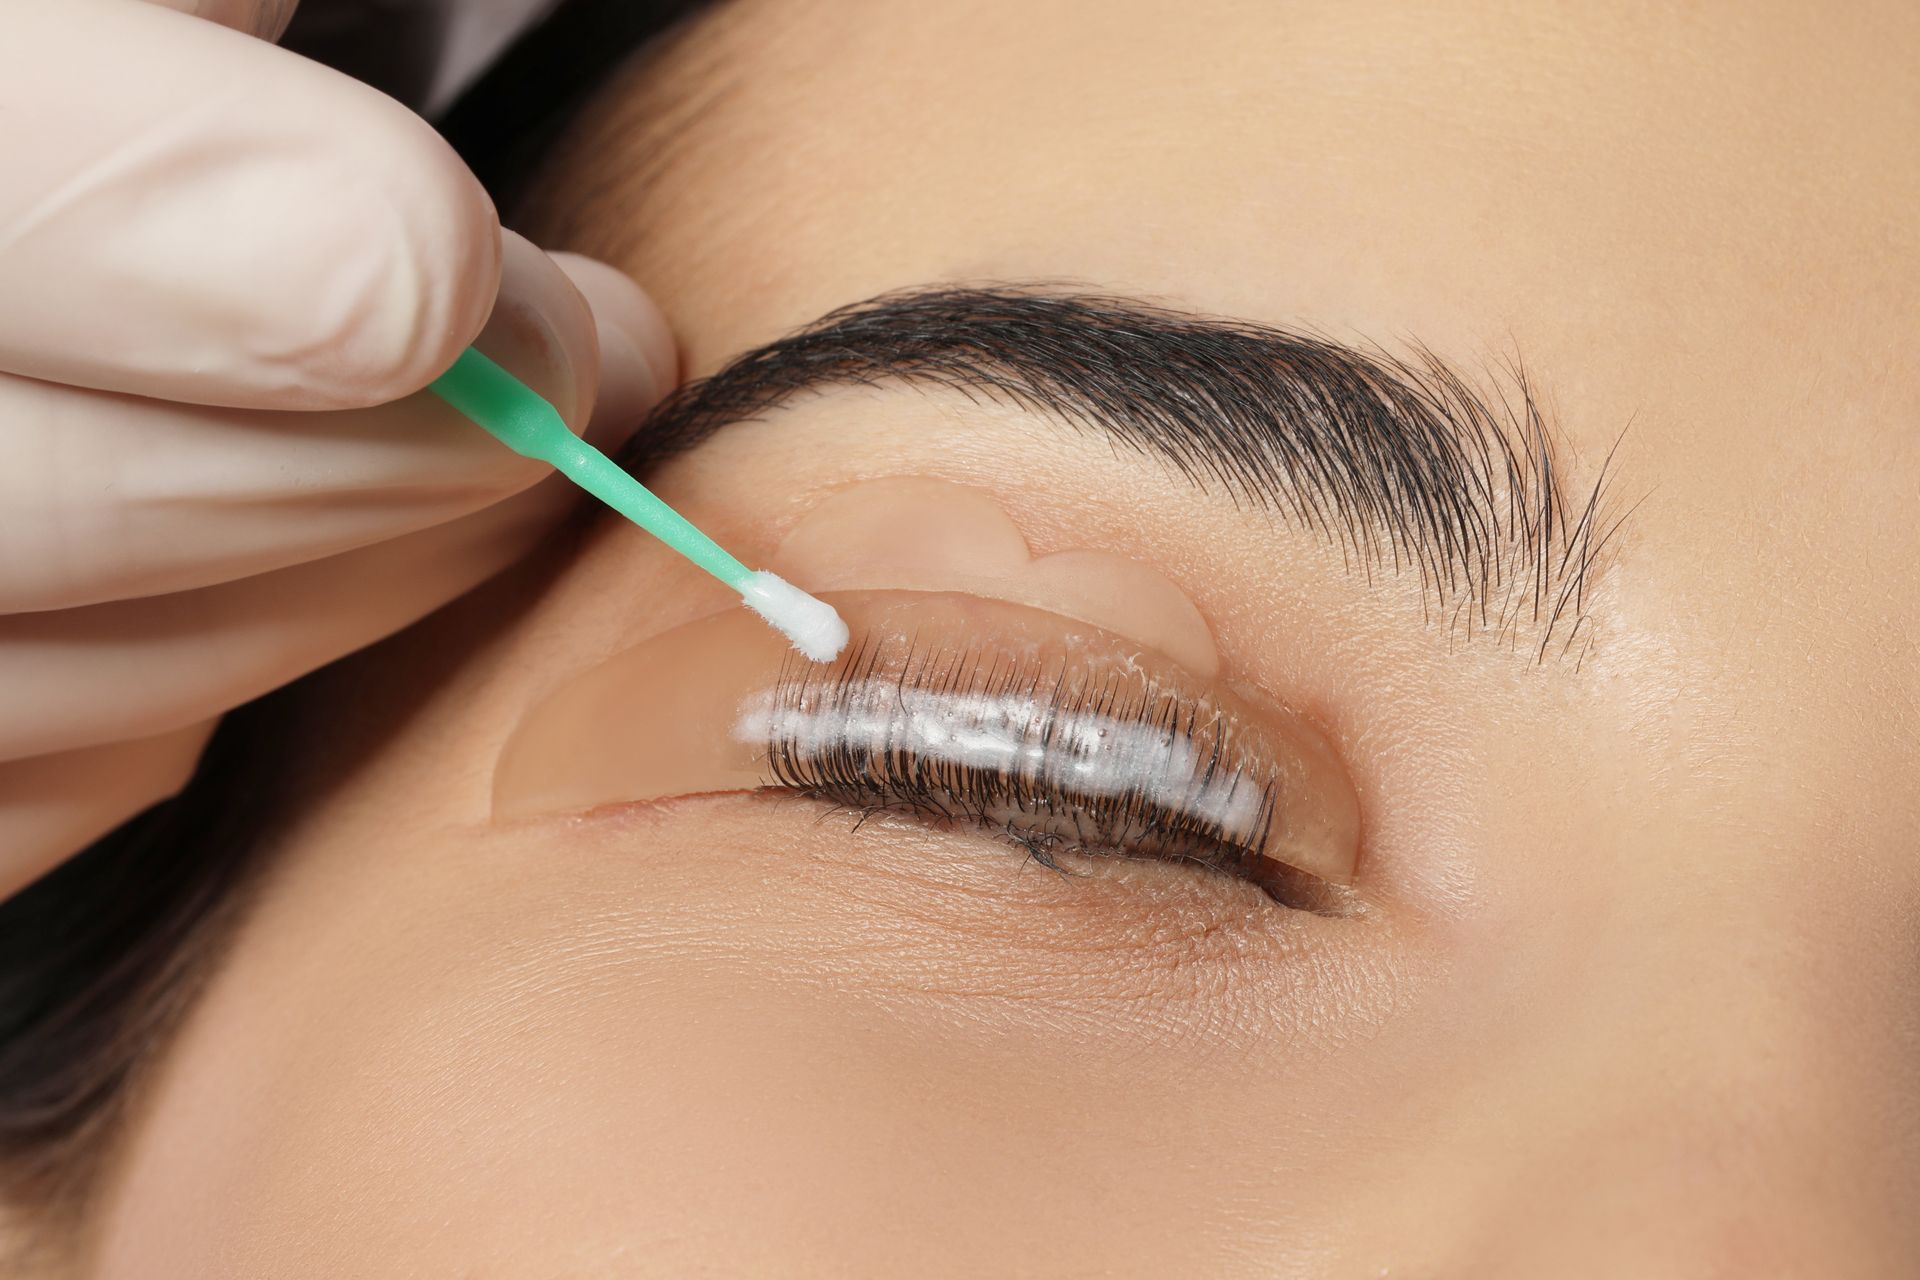 a close up of a woman's eye being cleaned with a cotton swab